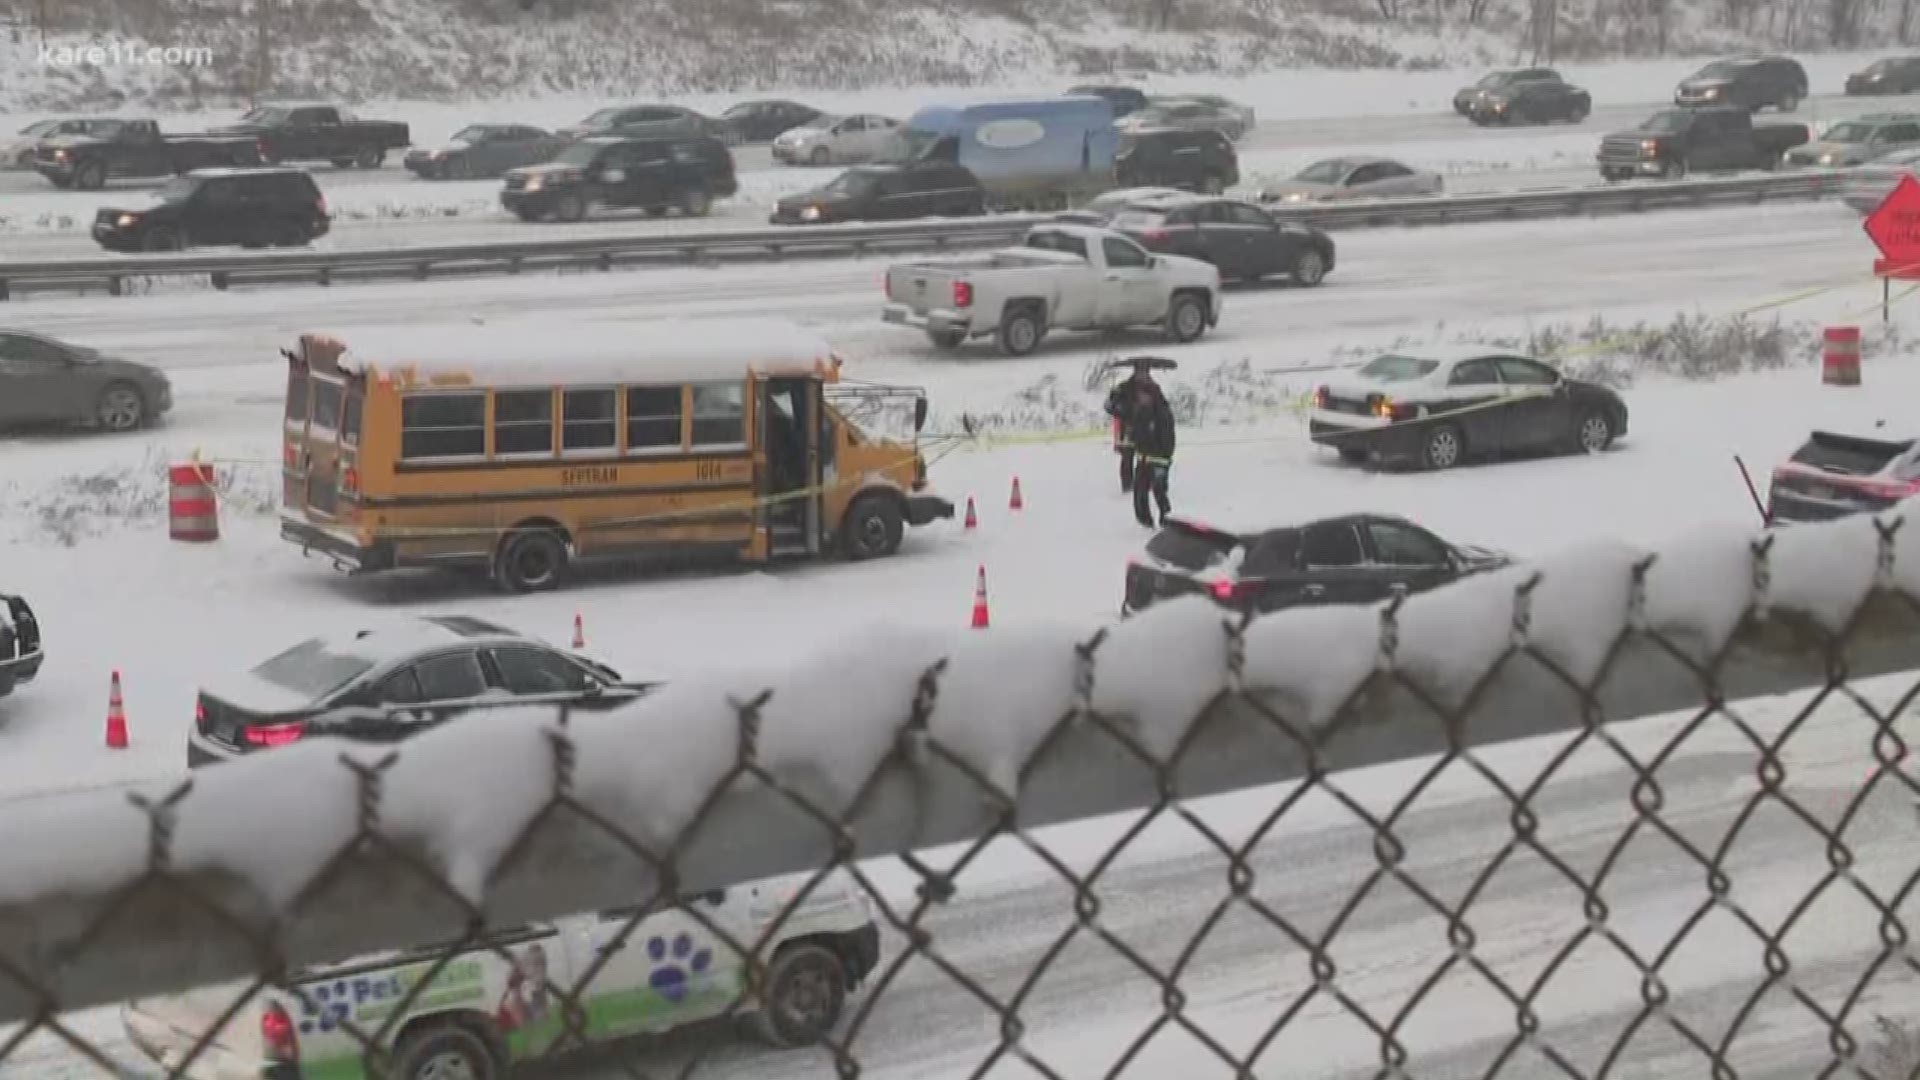 A Minneapolis Public Schools bus driver was shot and injured while driving his route near the junction of I-94 and I-35W Tuesday afternoon. A child was on board but was not injured. https://kare11.tv/2GaCBJL